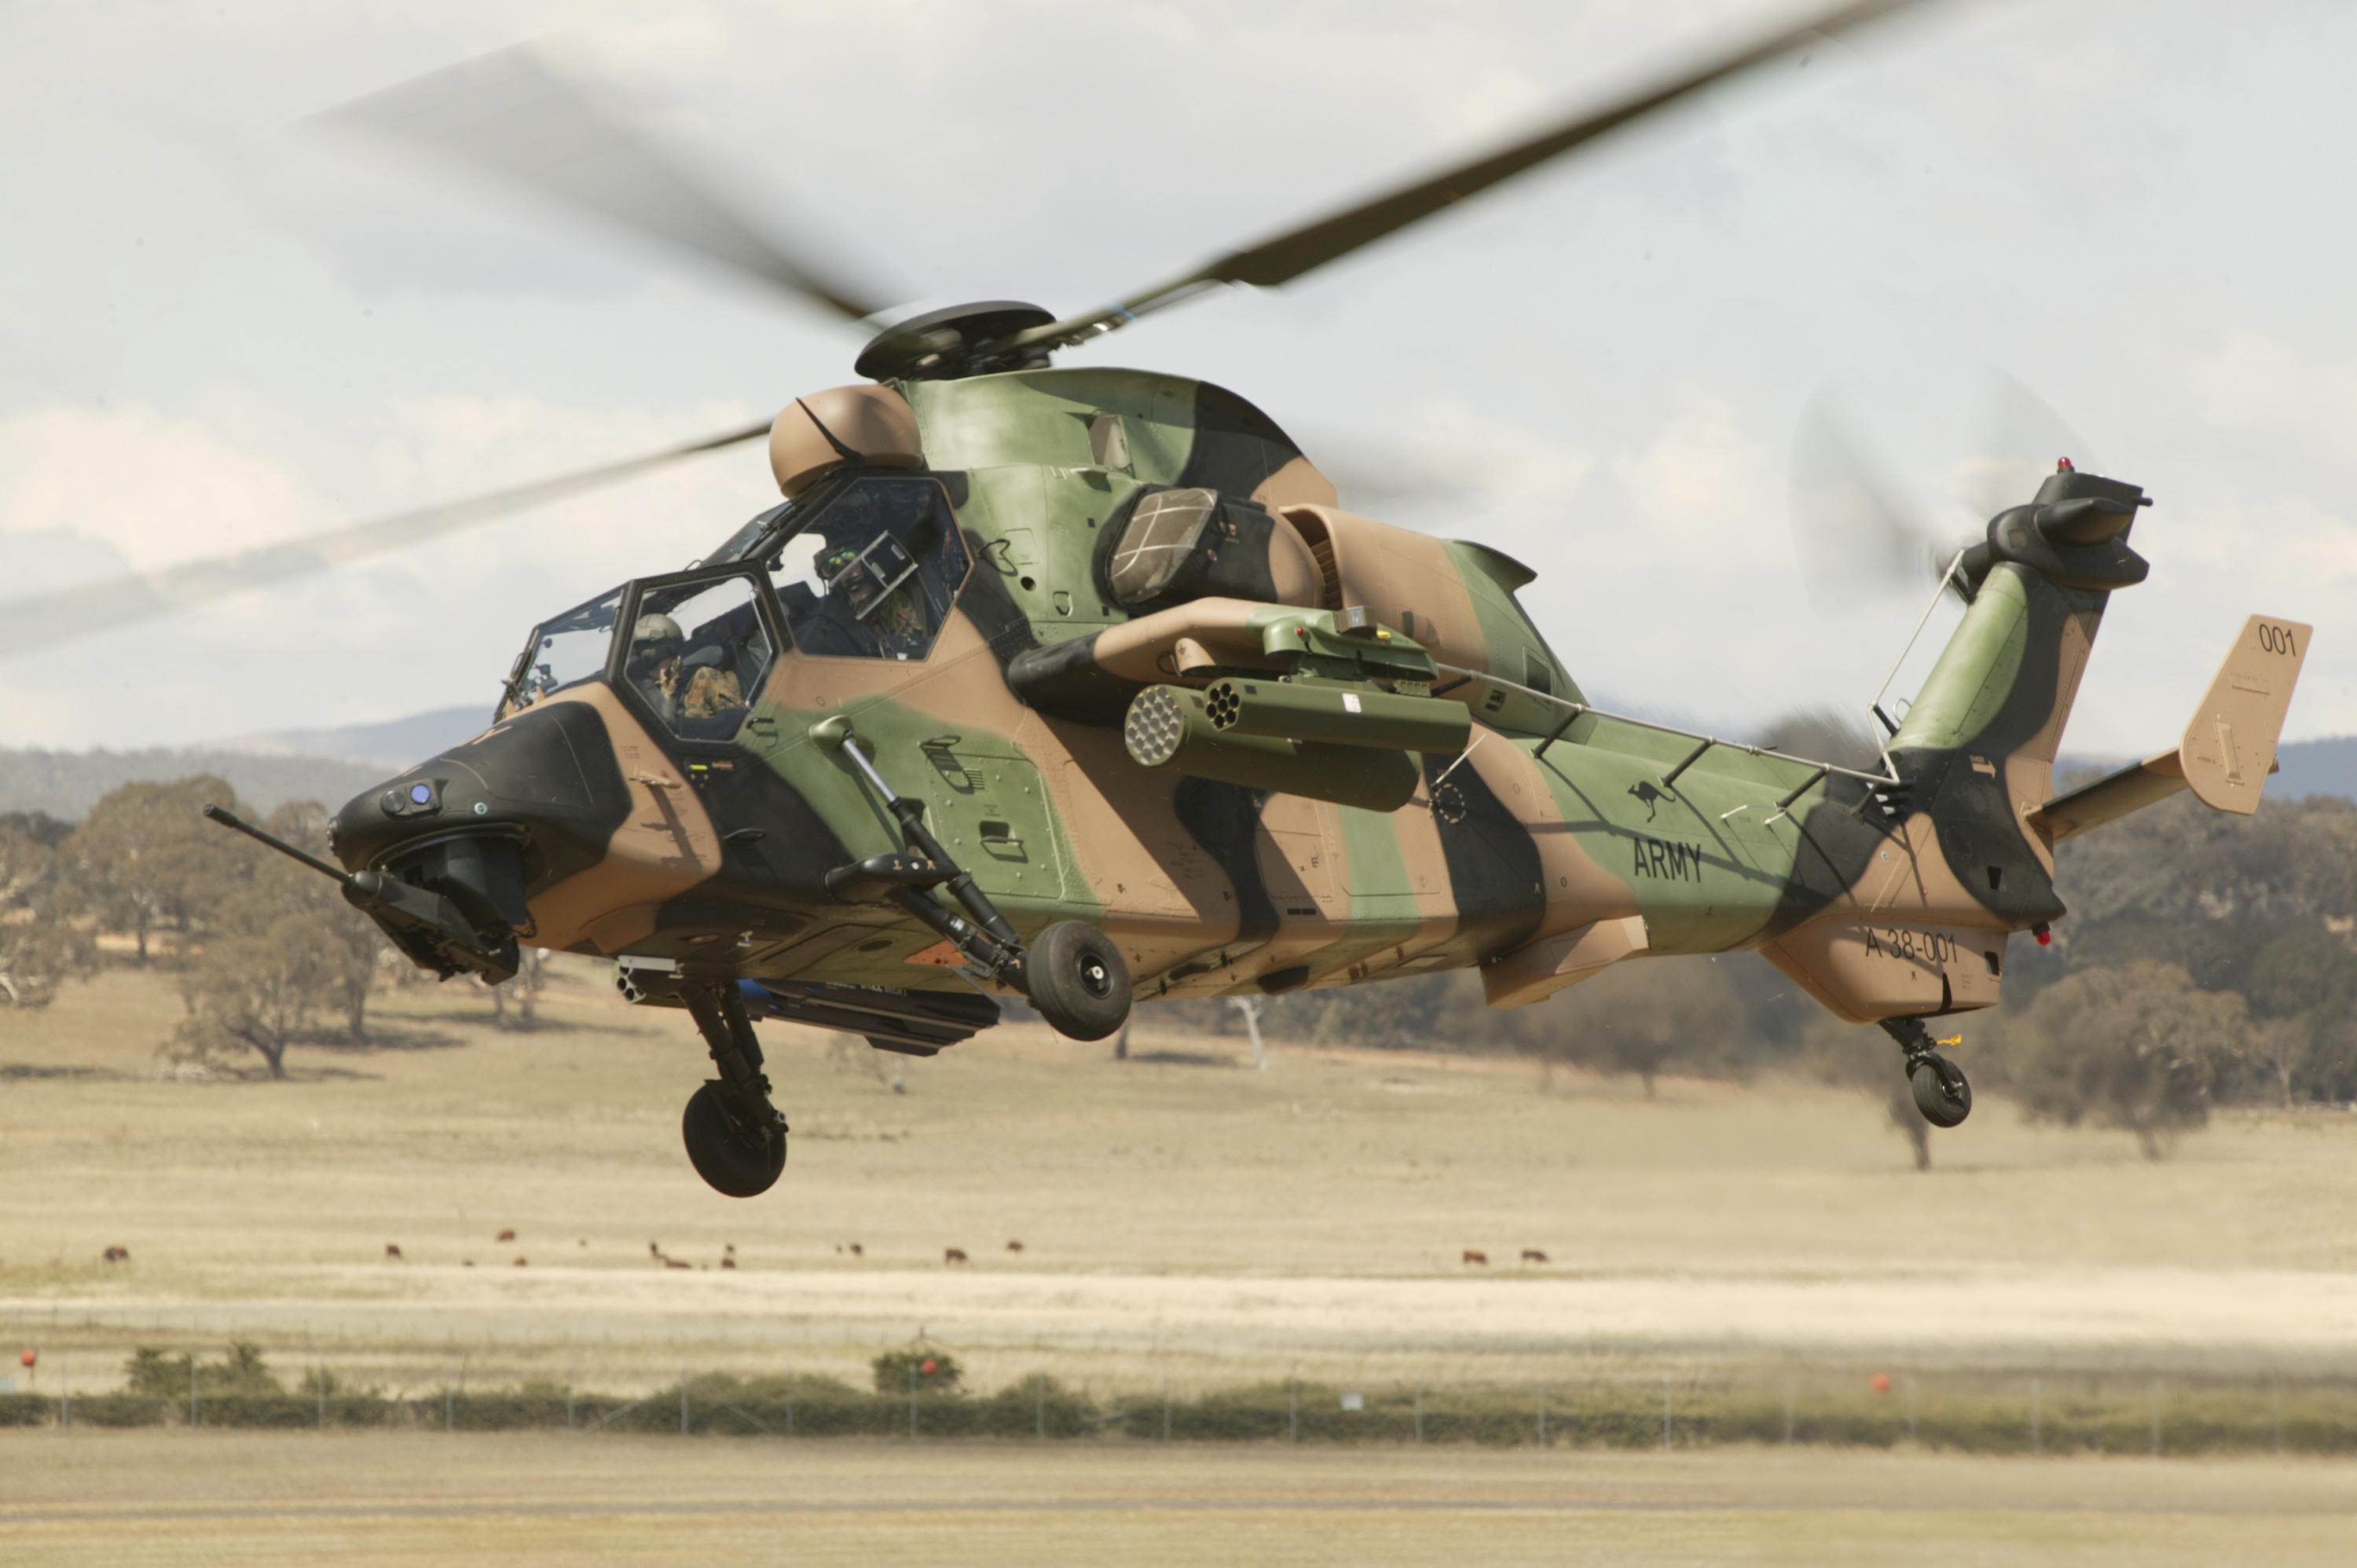 military, eurocopter tiger, attack helicopter, helicopter, military helicopters